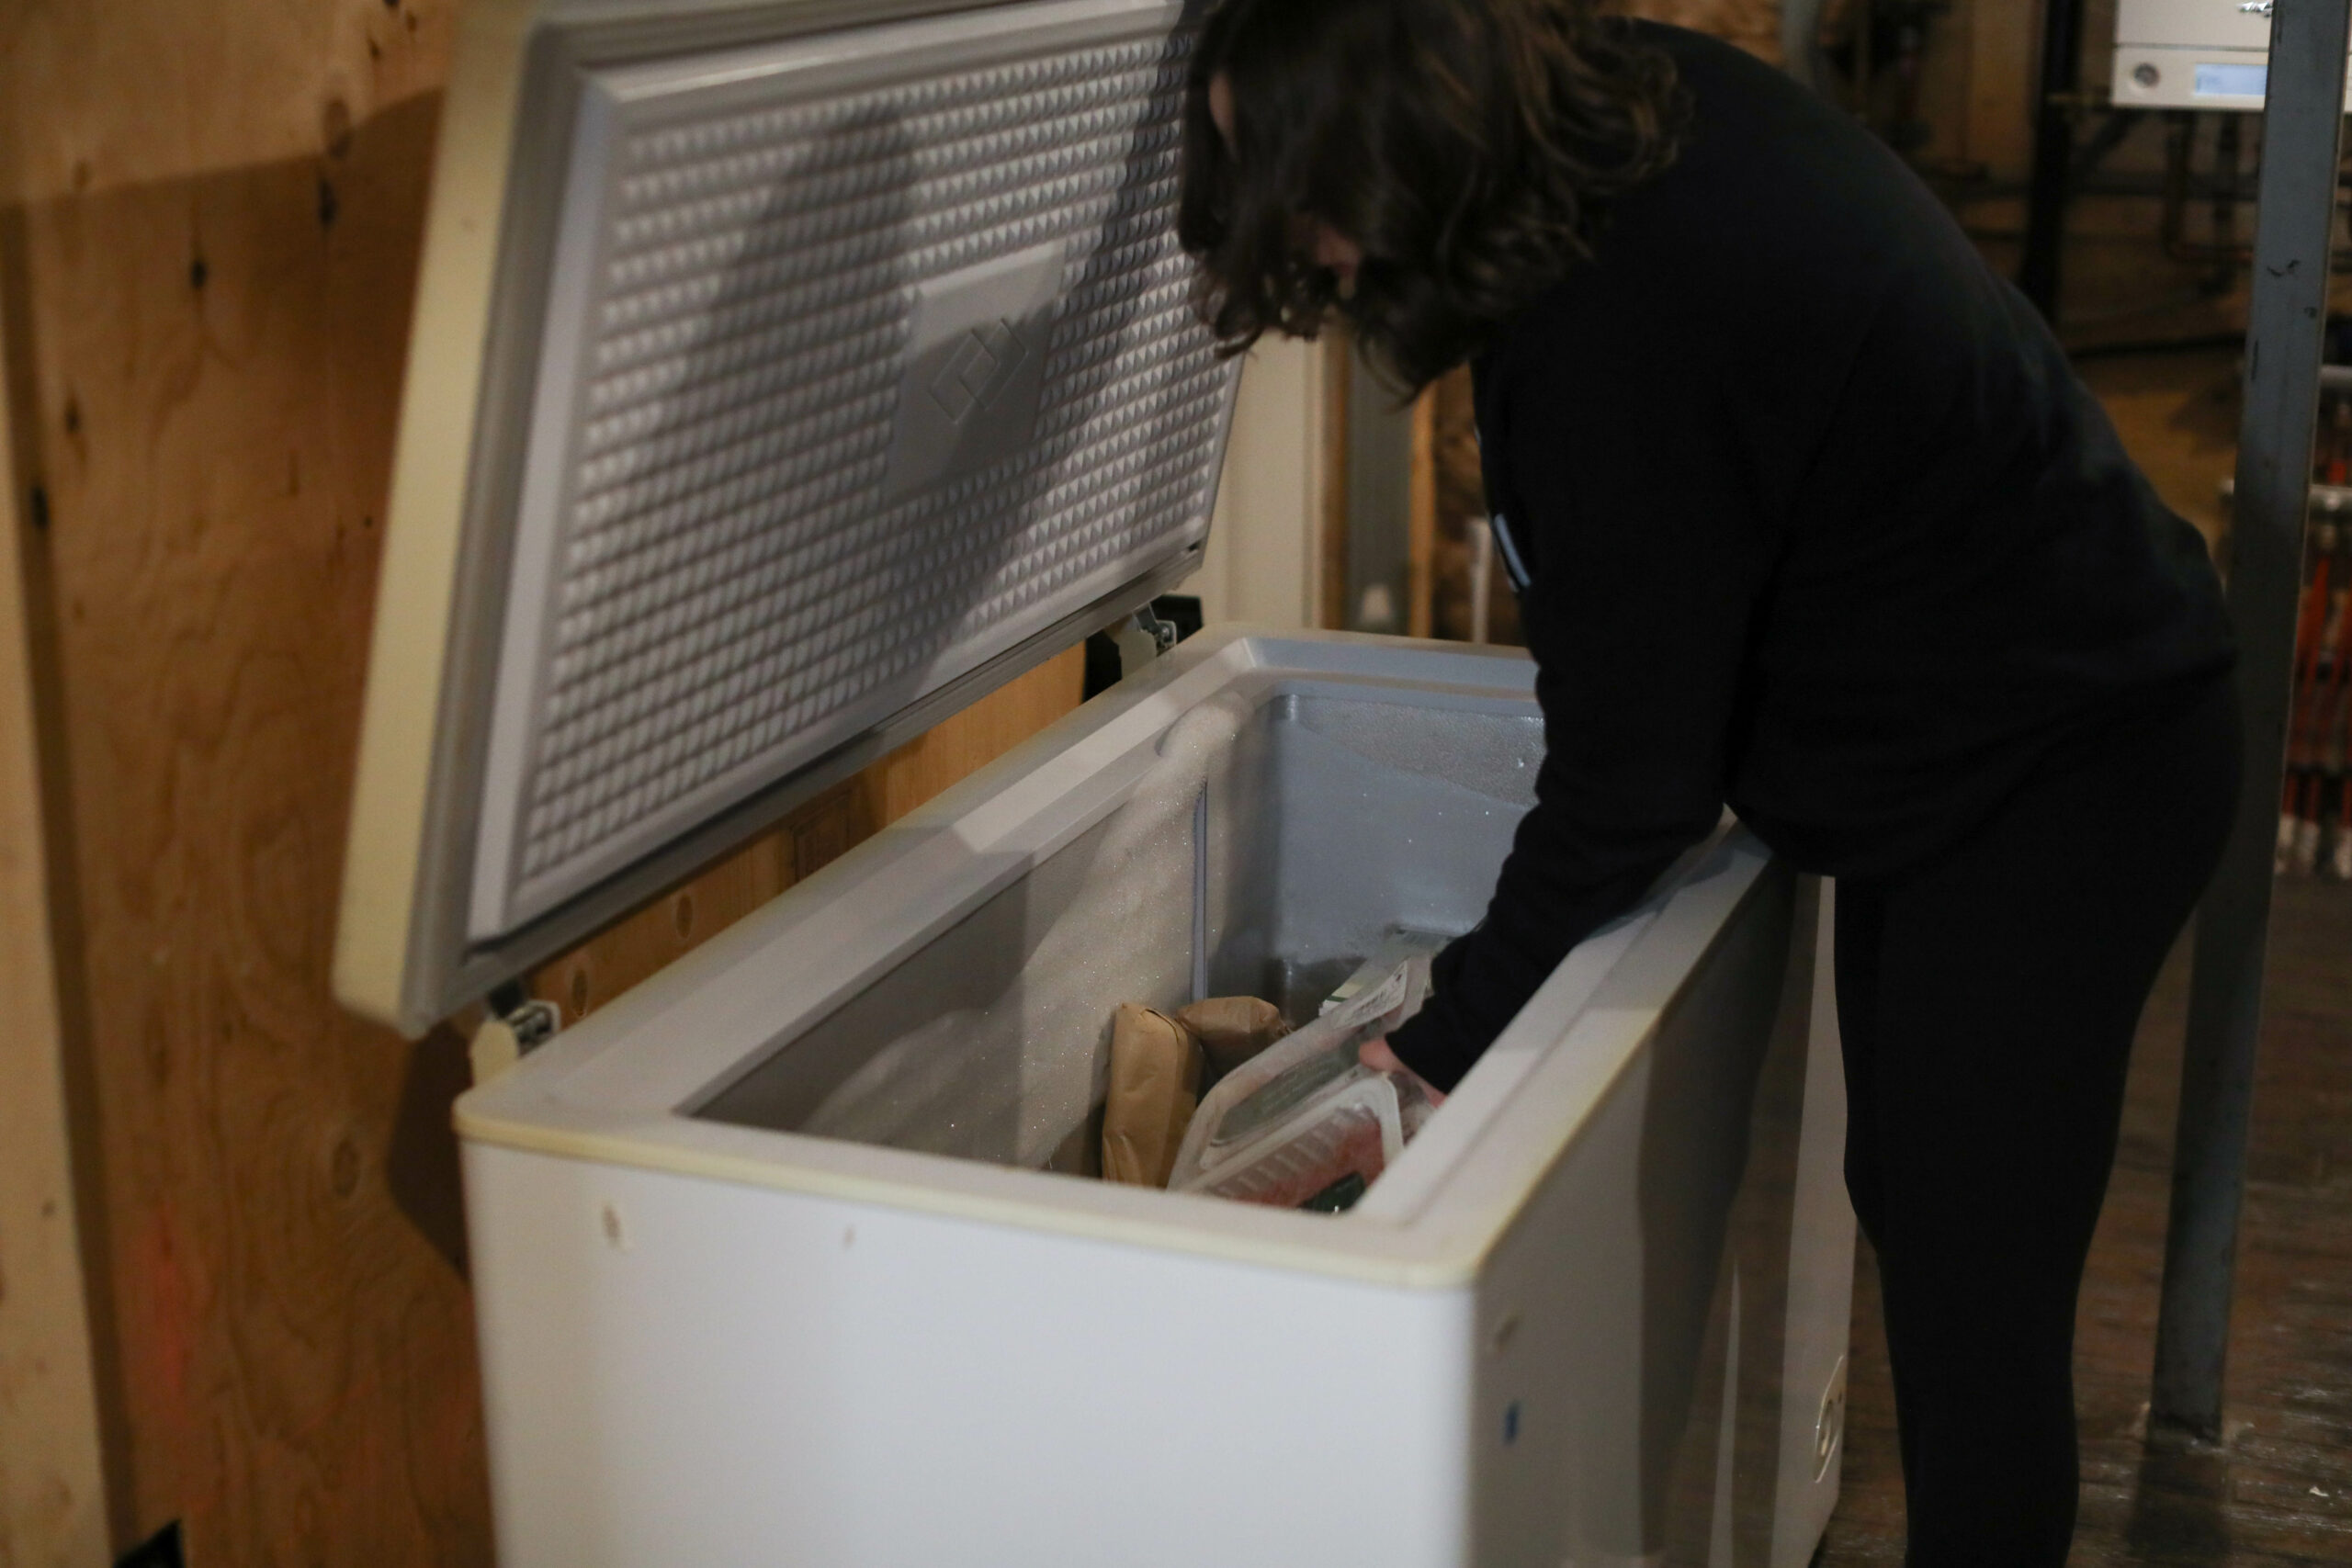 Stinky Freezer? Stay Cool and Try This Hack